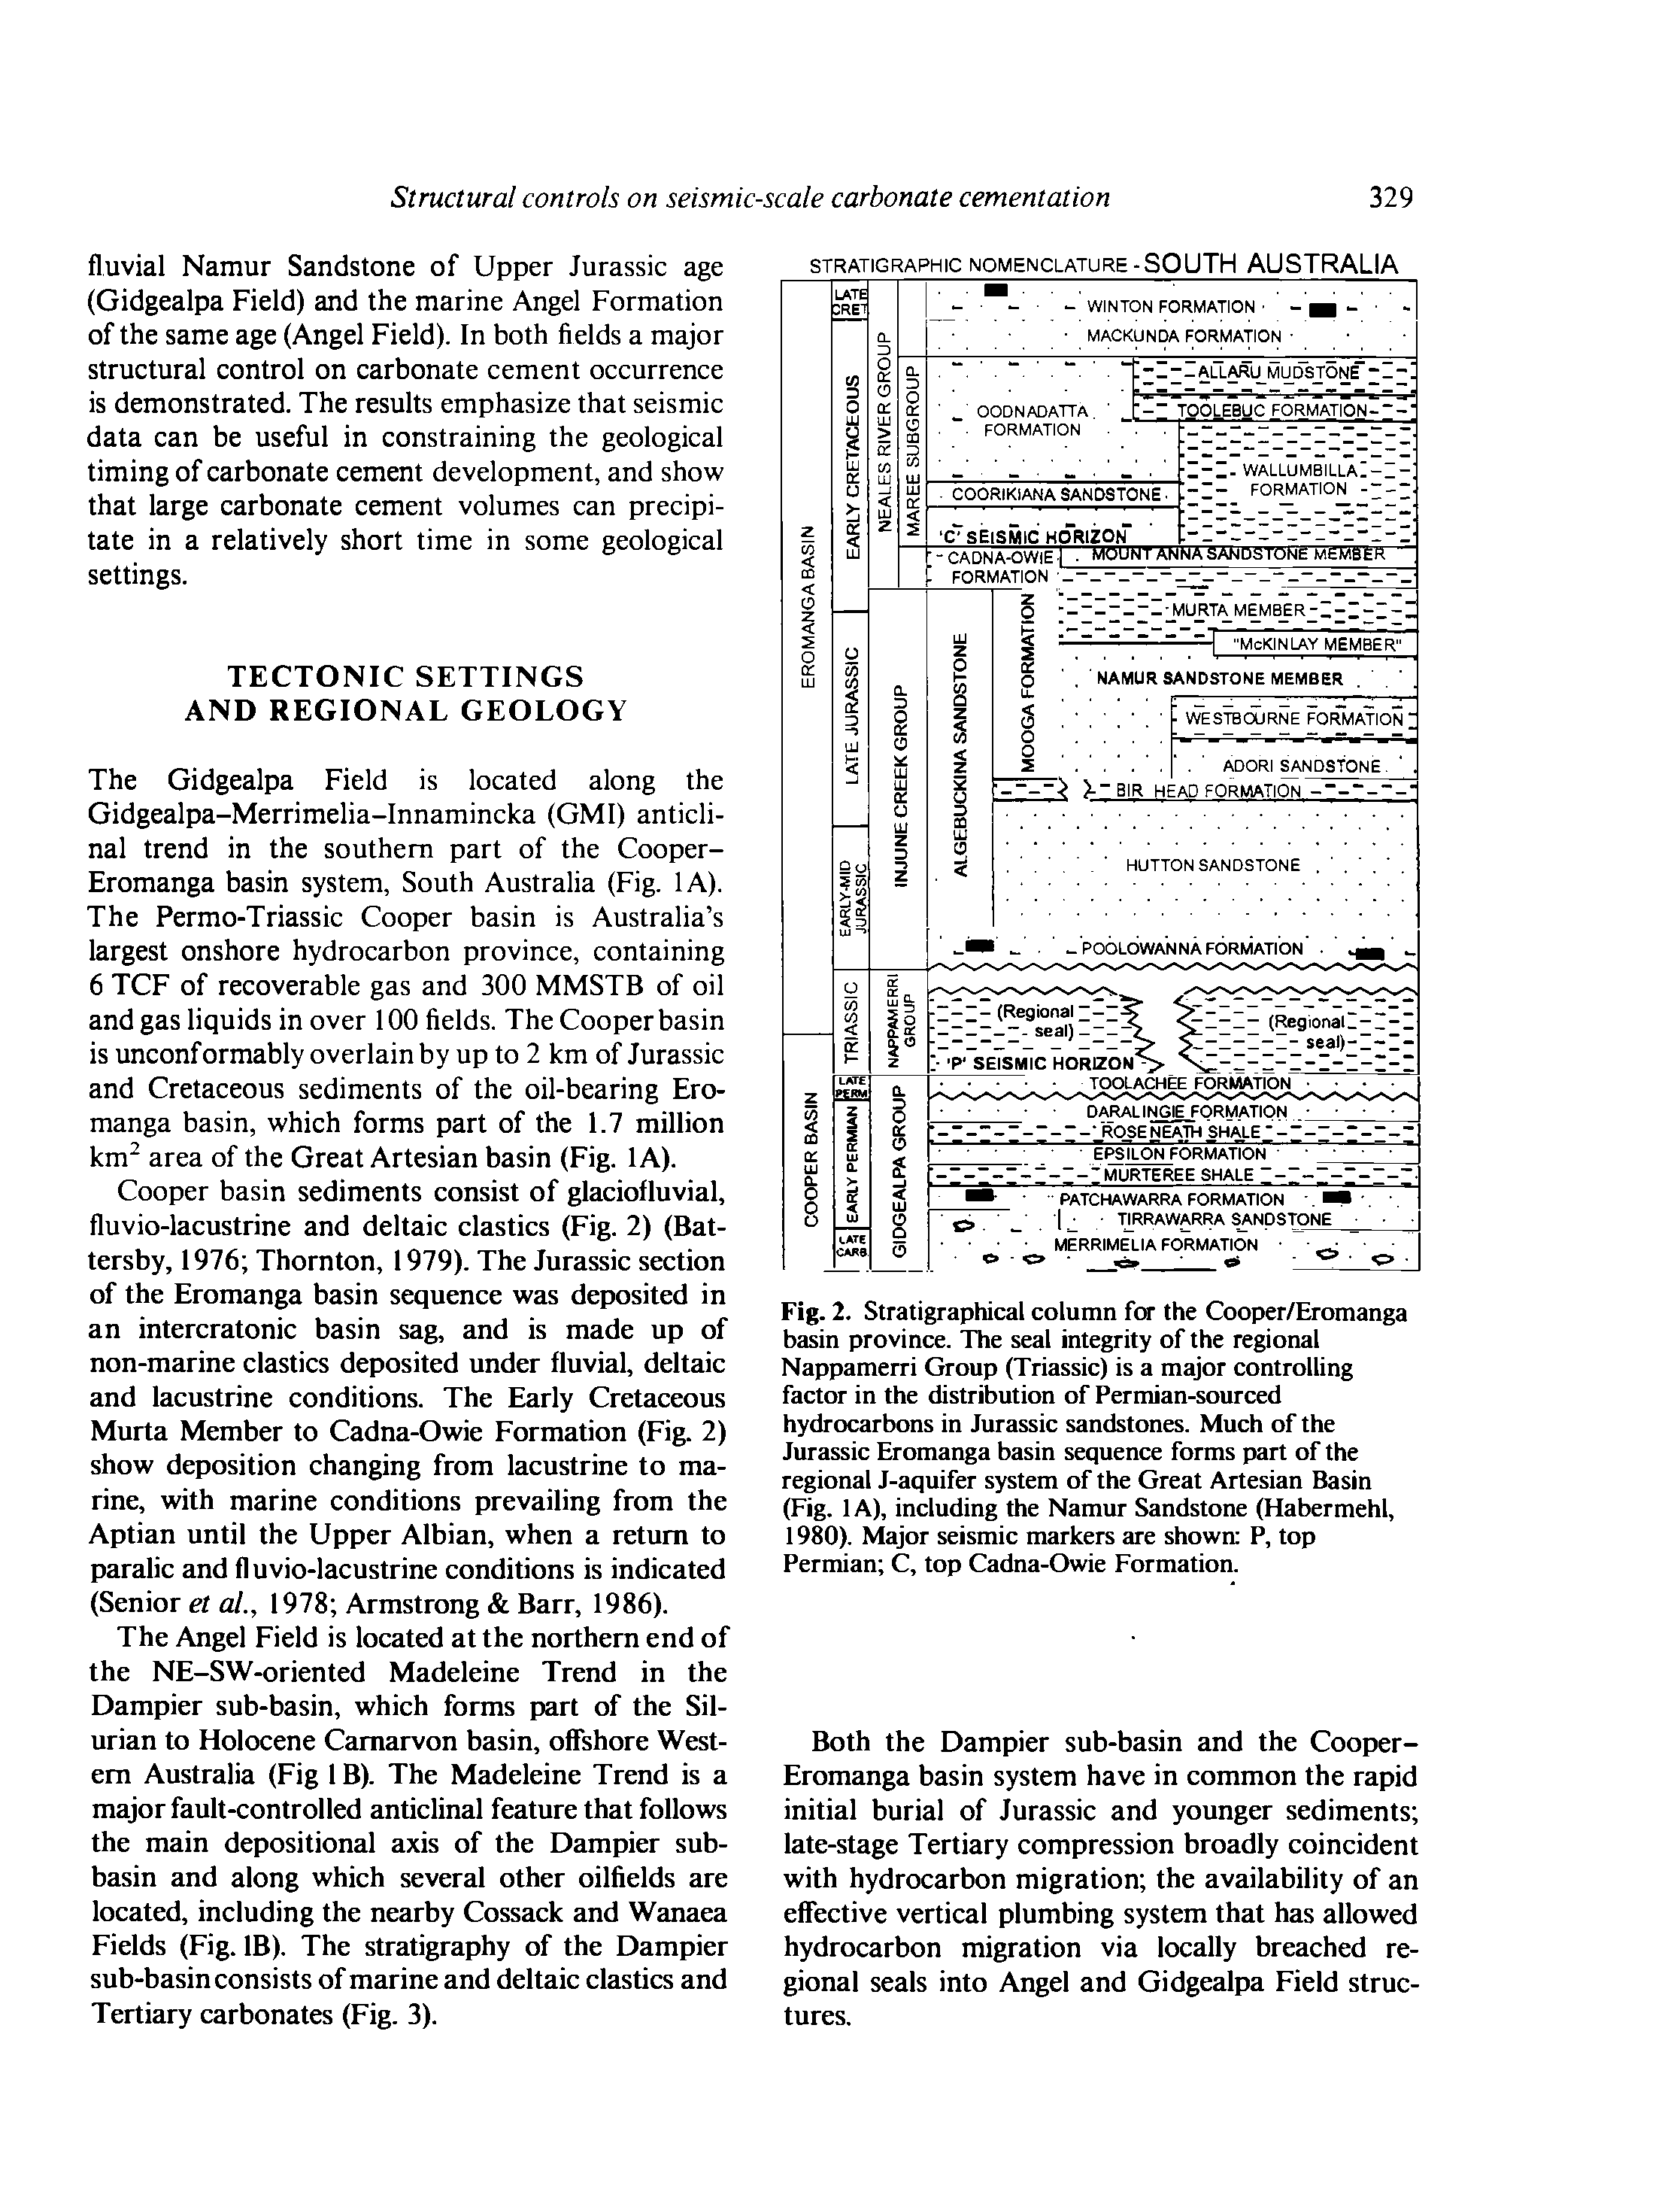 Fig. 2. Stratigraphical column for the Cooper/Eromanga basin province. The seal integrity of the regional Nappamerri Group (Triassic) is a major controlling factor in the distribution of Permian-sourced hydrocarbons in Jurassic sandstones. Much of the Jurassic Eromanga basin sequence forms part of the regional J-aquifer system of the Great Artesian Basin (Fig. lA), including the Namur Sandstone (Habermehl,...